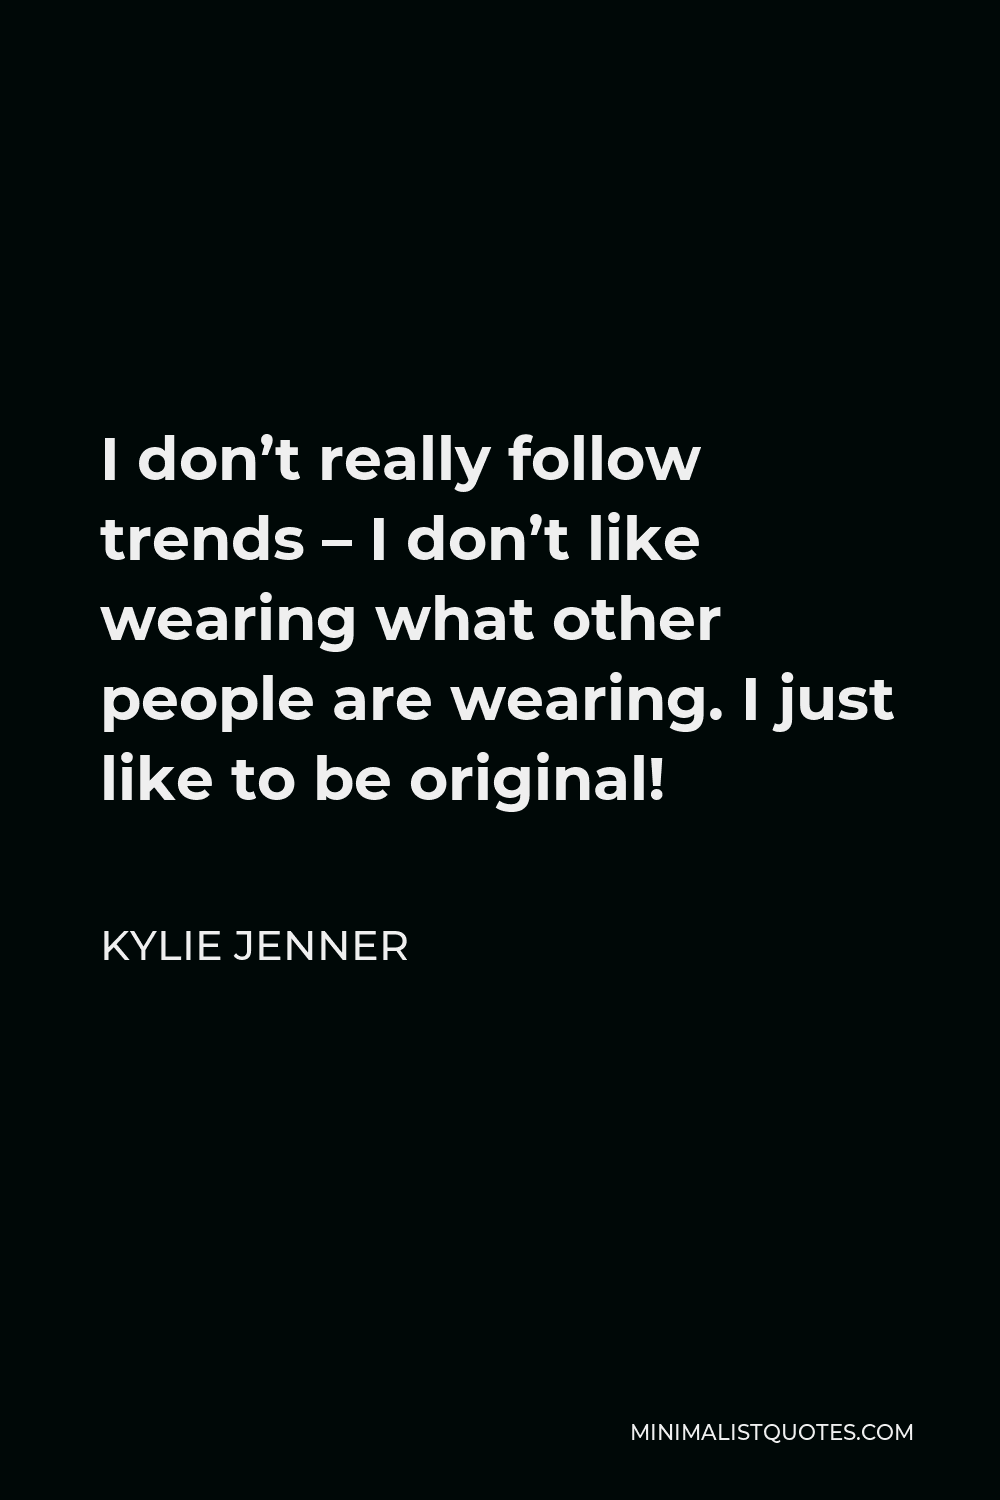 Kylie Jenner Quote - I don’t really follow trends – I don’t like wearing what other people are wearing. I just like to be original!